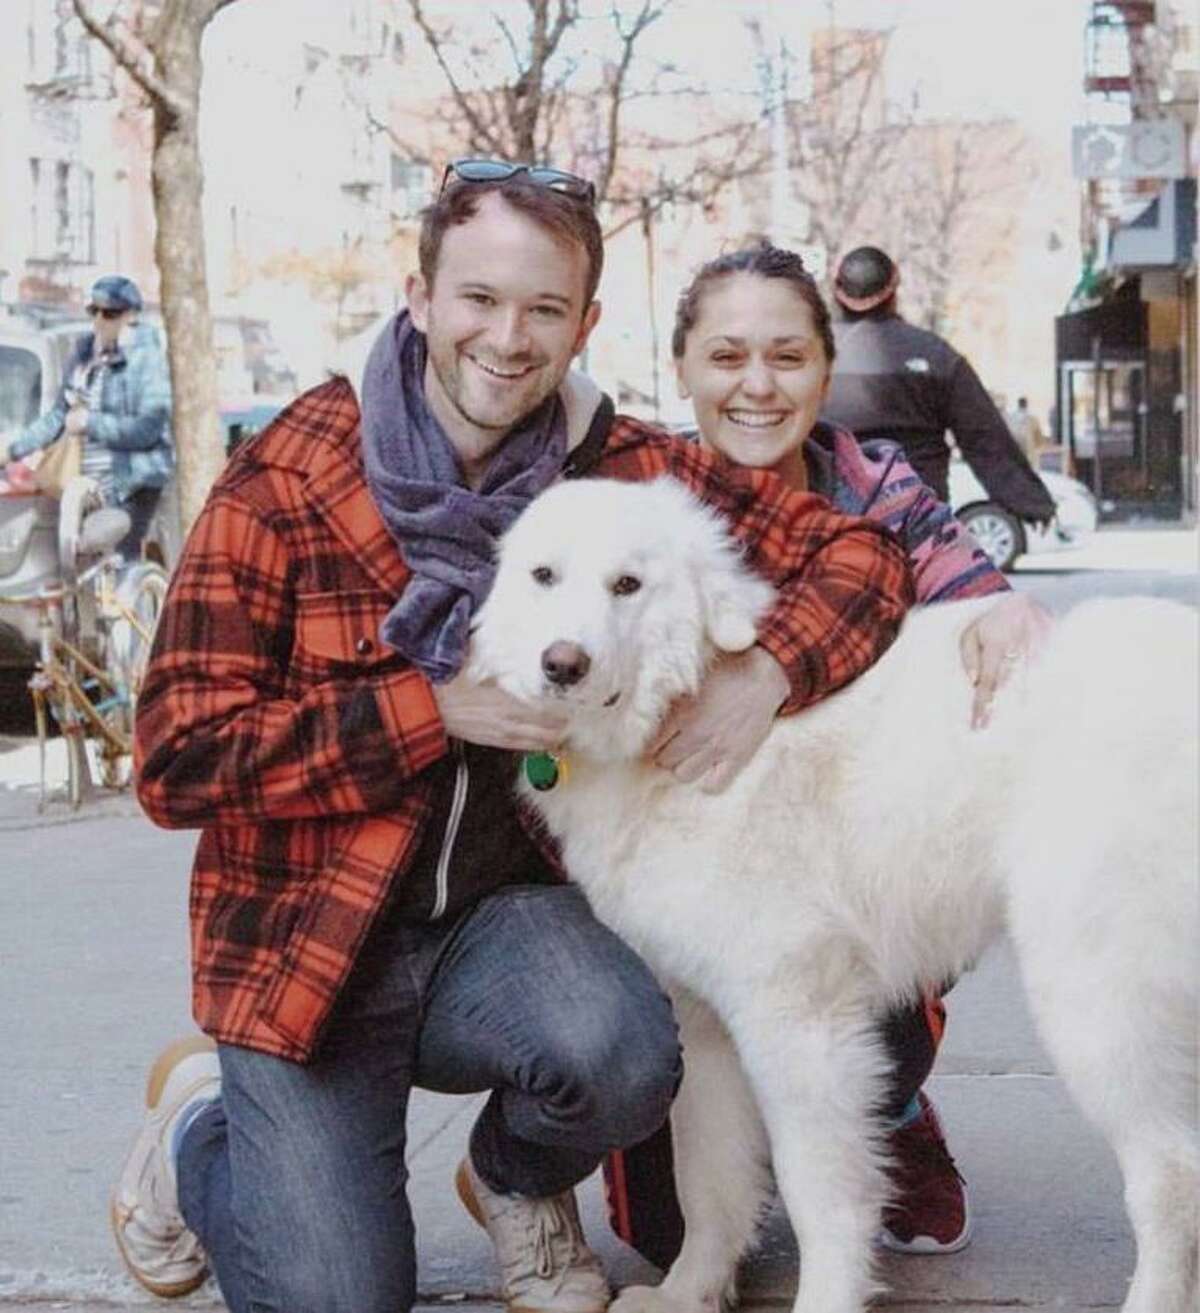 Luther James “Luke” Smith and Lily Rebecca Robinson with their dog, Winston.